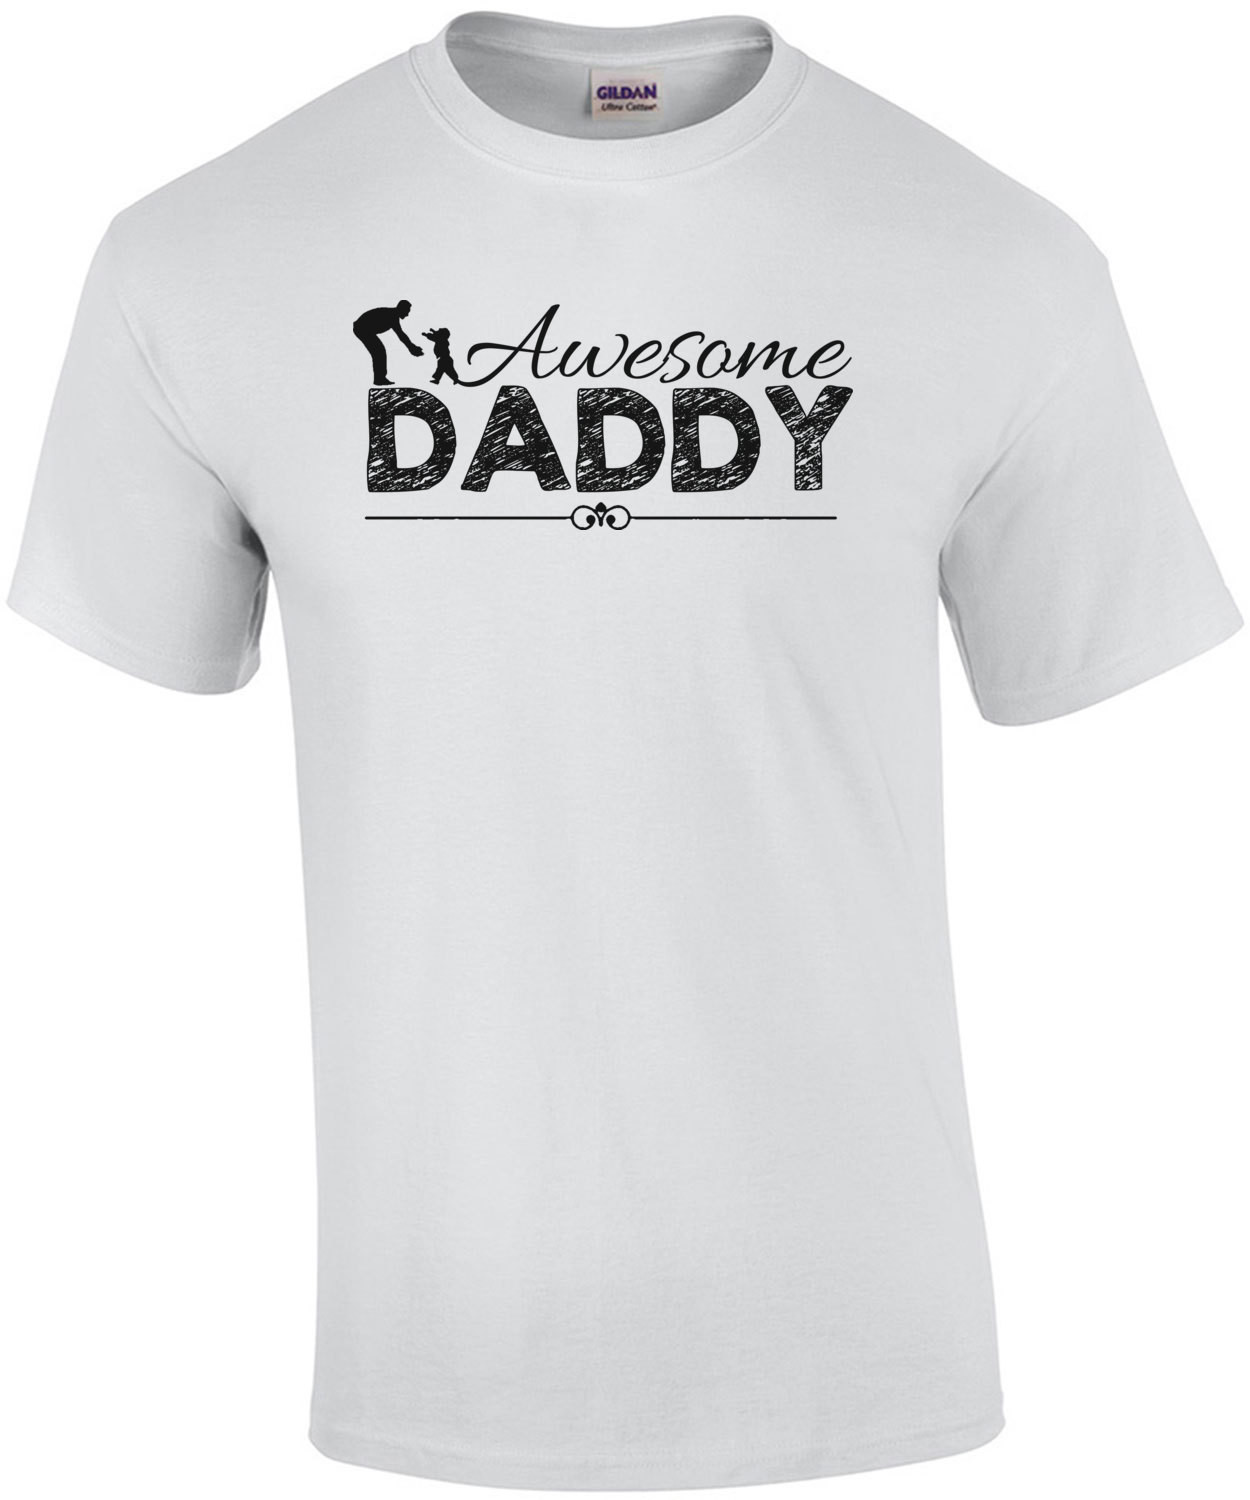 Awesome Daddy T-Shirt